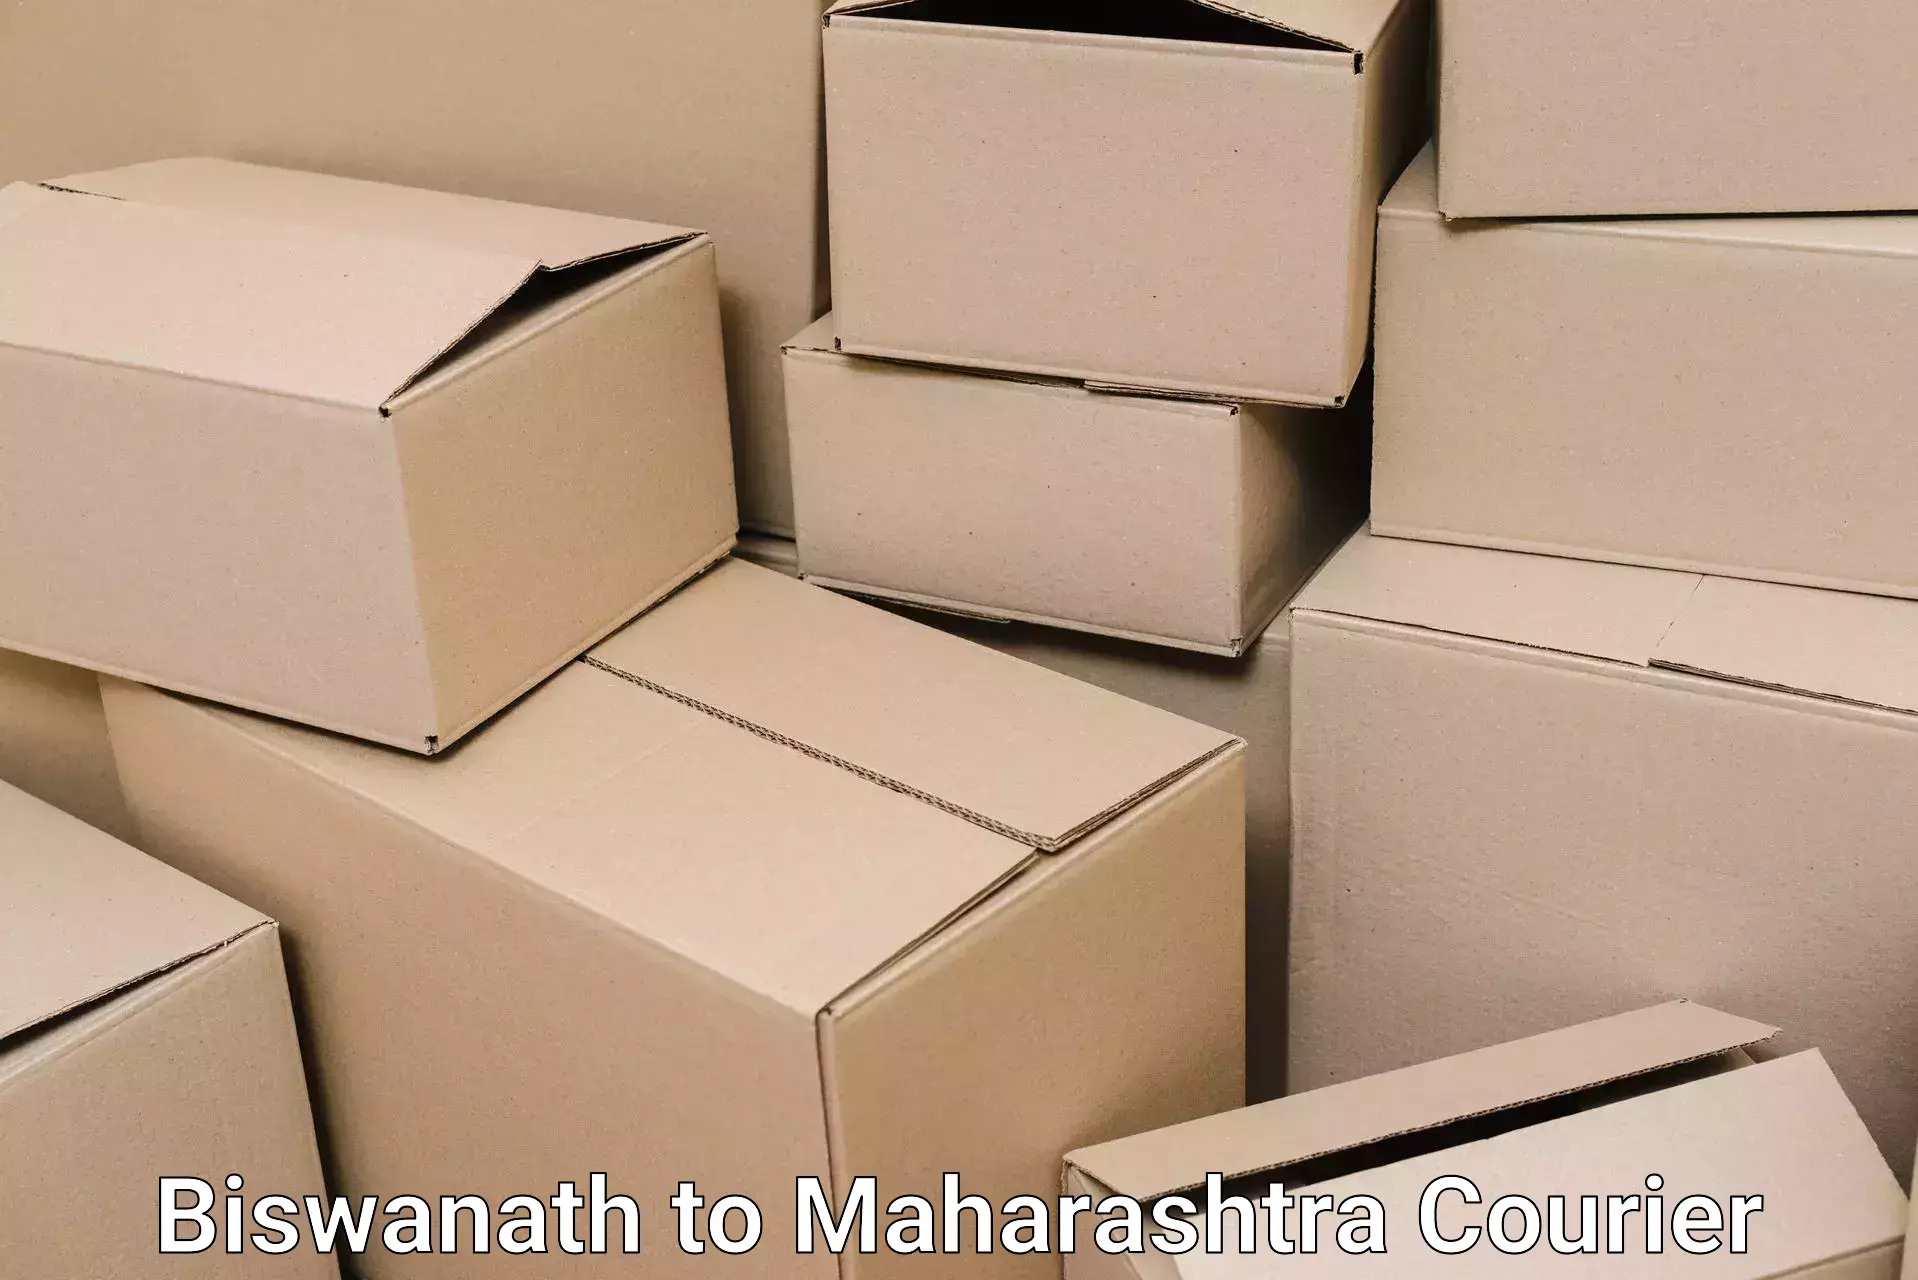 Furniture delivery service Biswanath to Talere